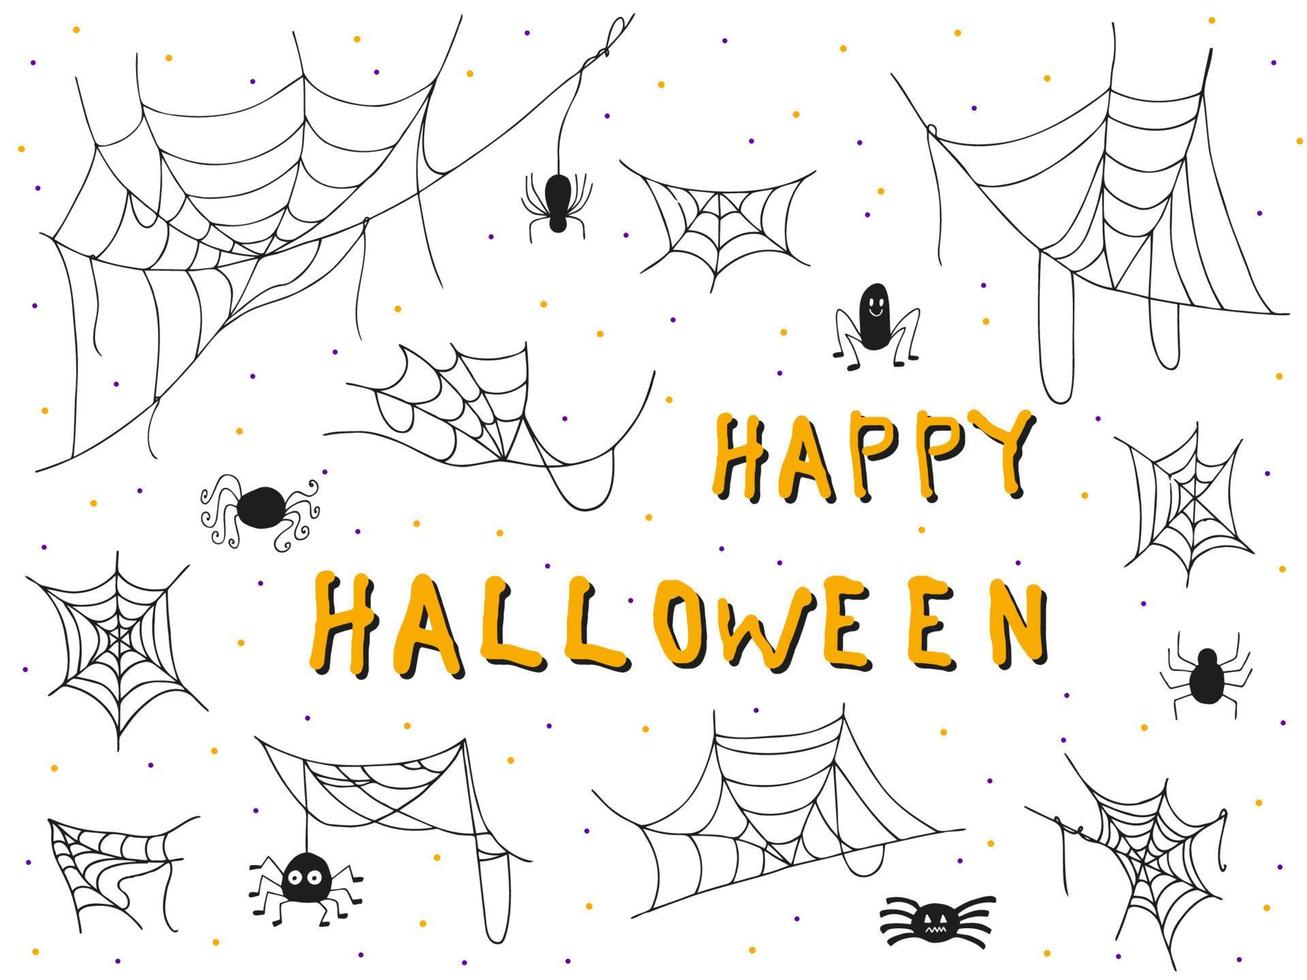 Halloween 2022 - October 31. A traditional holiday. Trick or treat. Vector illustration in hand-drawn doodle style. Set of silhouettes of spiderwebs.